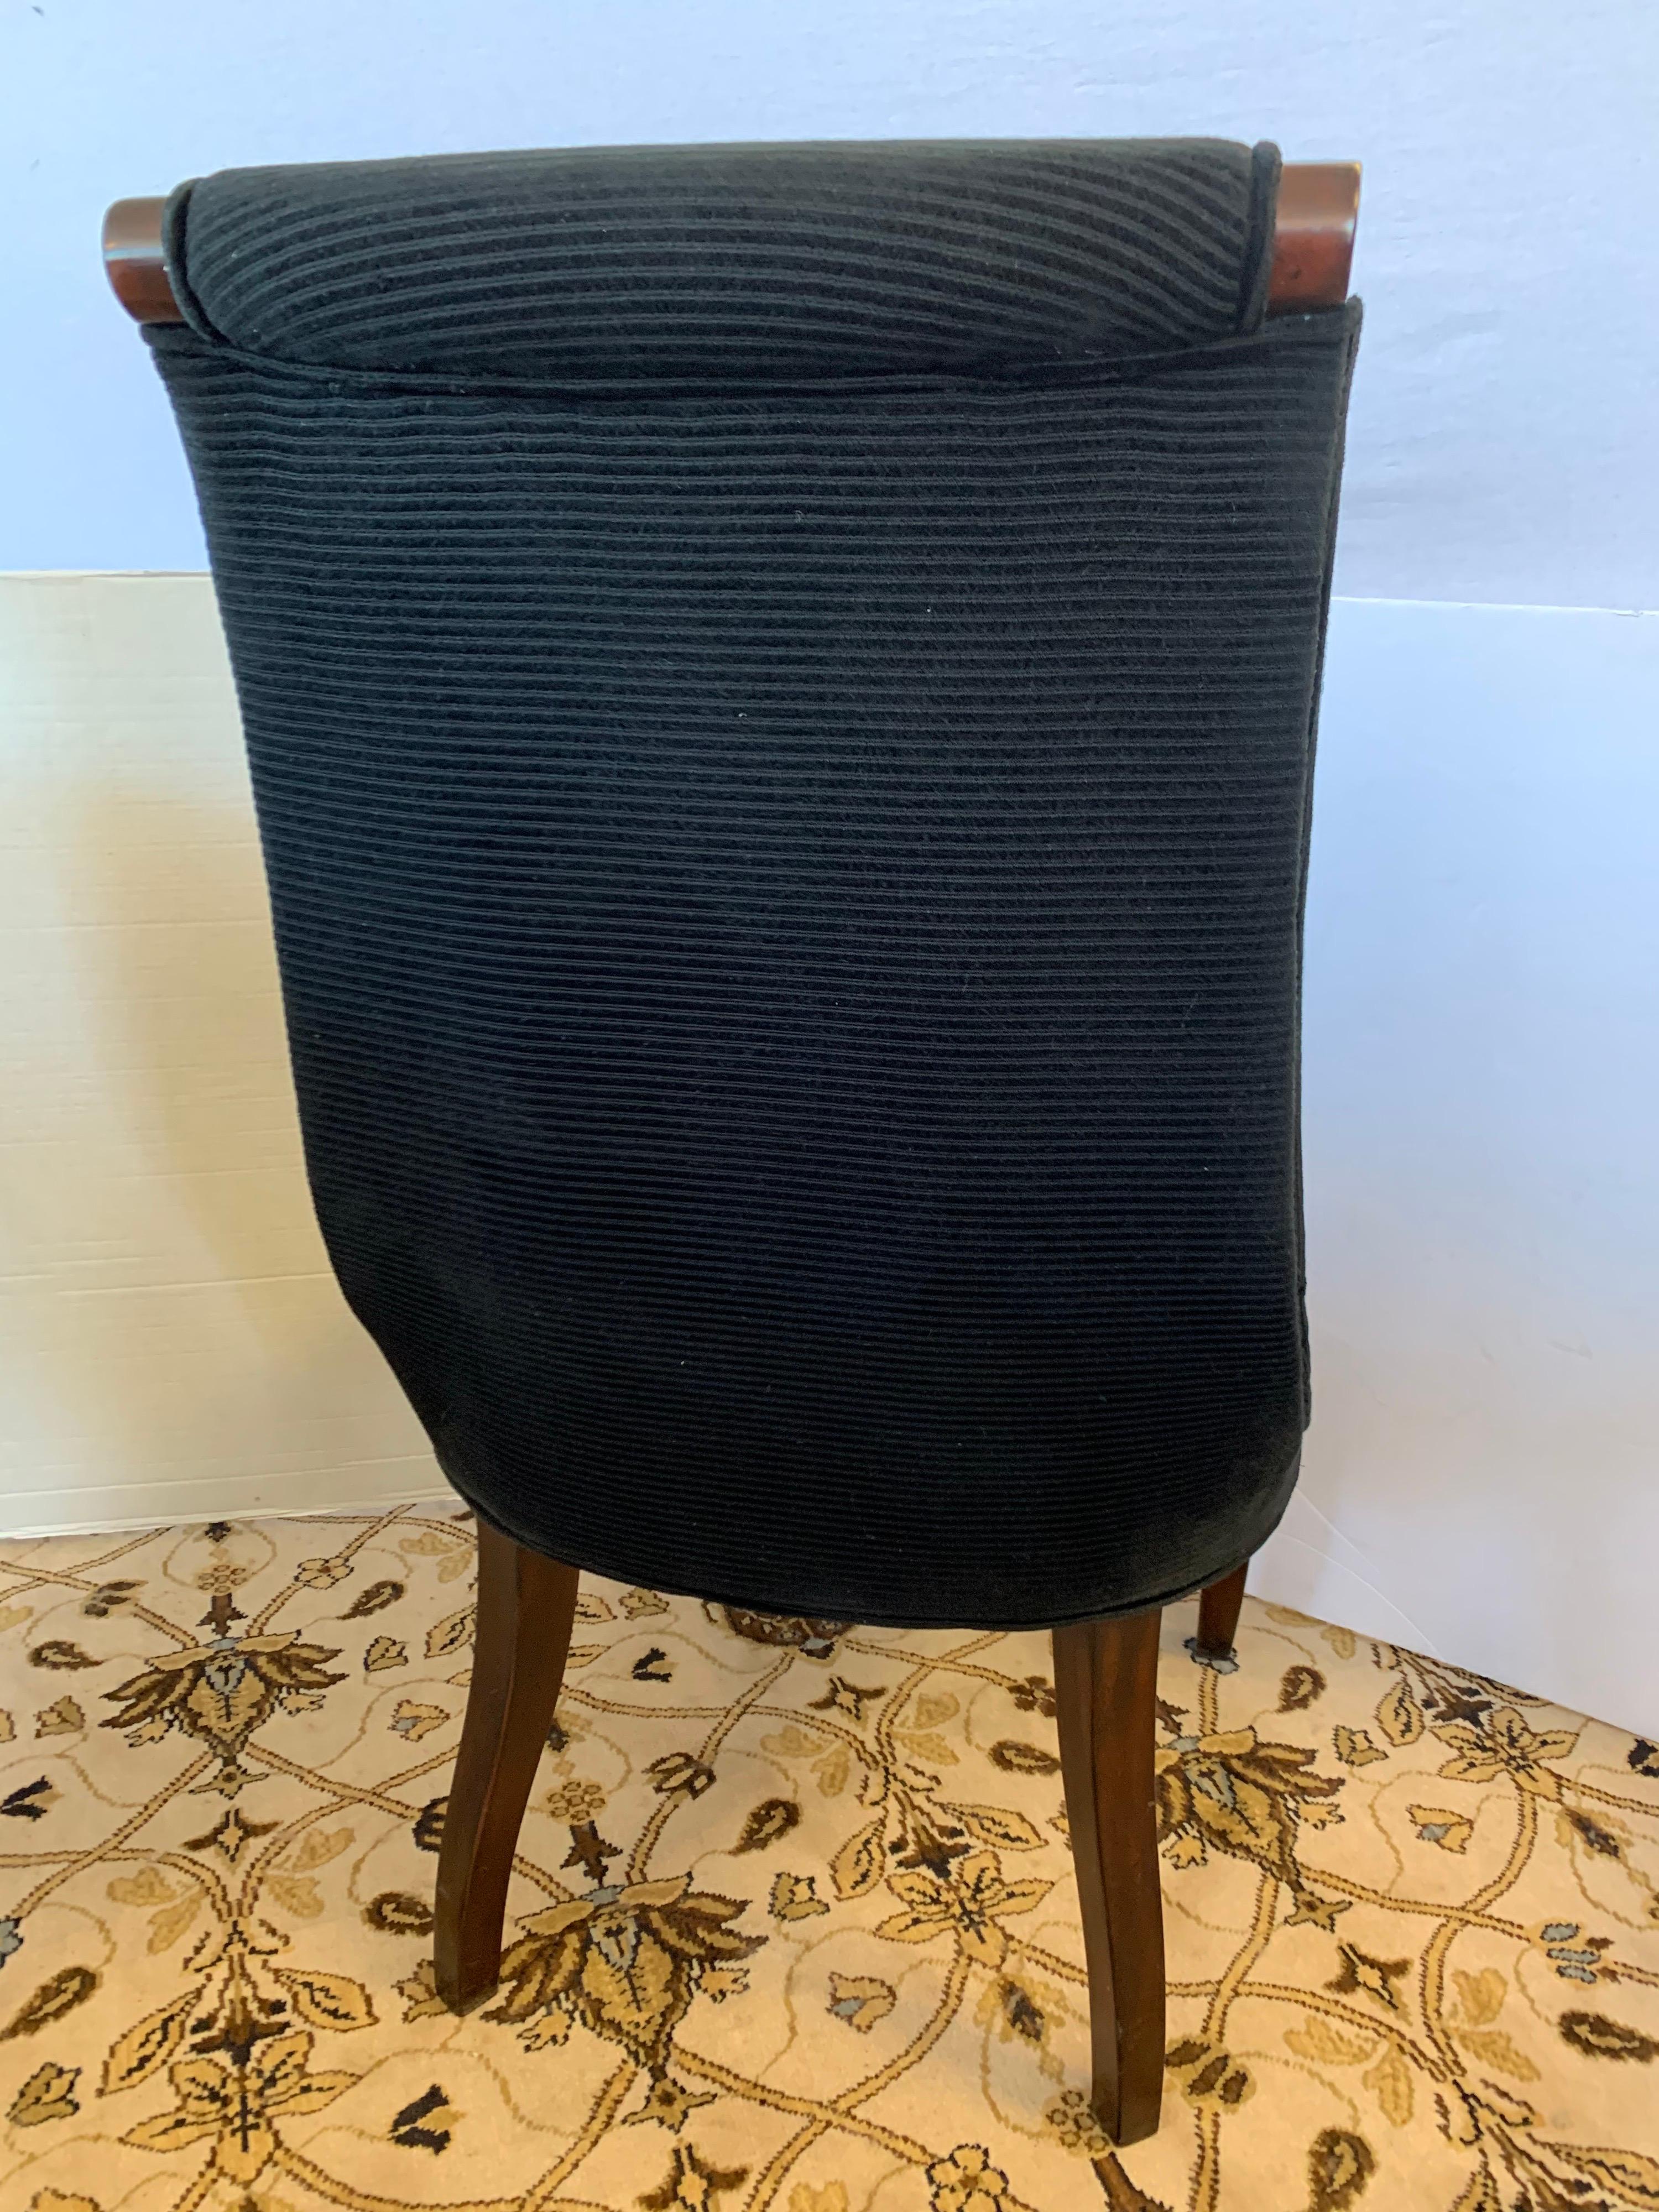 Magnificent set of eight Henredon dining chairs done in mahogany wood and a luxurious
black velvet fabric that has subtle pinstripes running horizontally. All vendor hallmarks are at bottom
and these chairs originally retailed at 1895.00 per